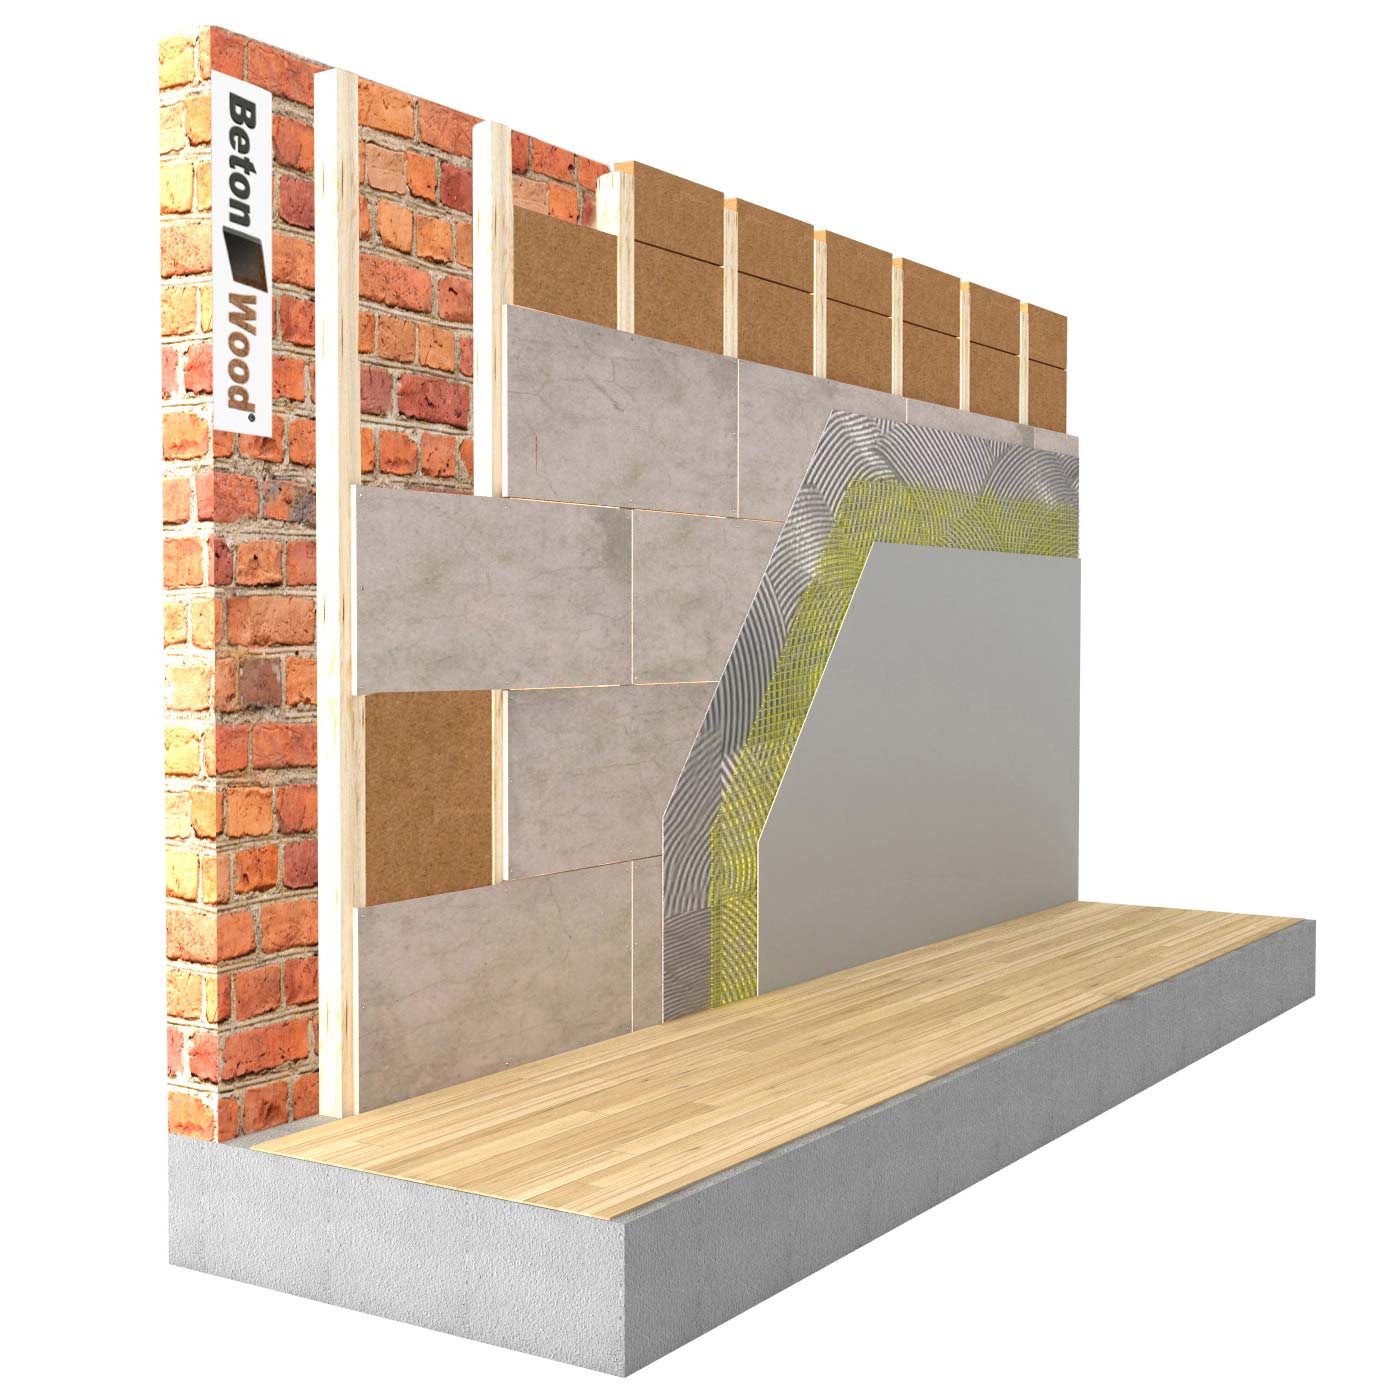 Internal insulation system with fiber wood FiberTherm and cement bonded particle board on masonry